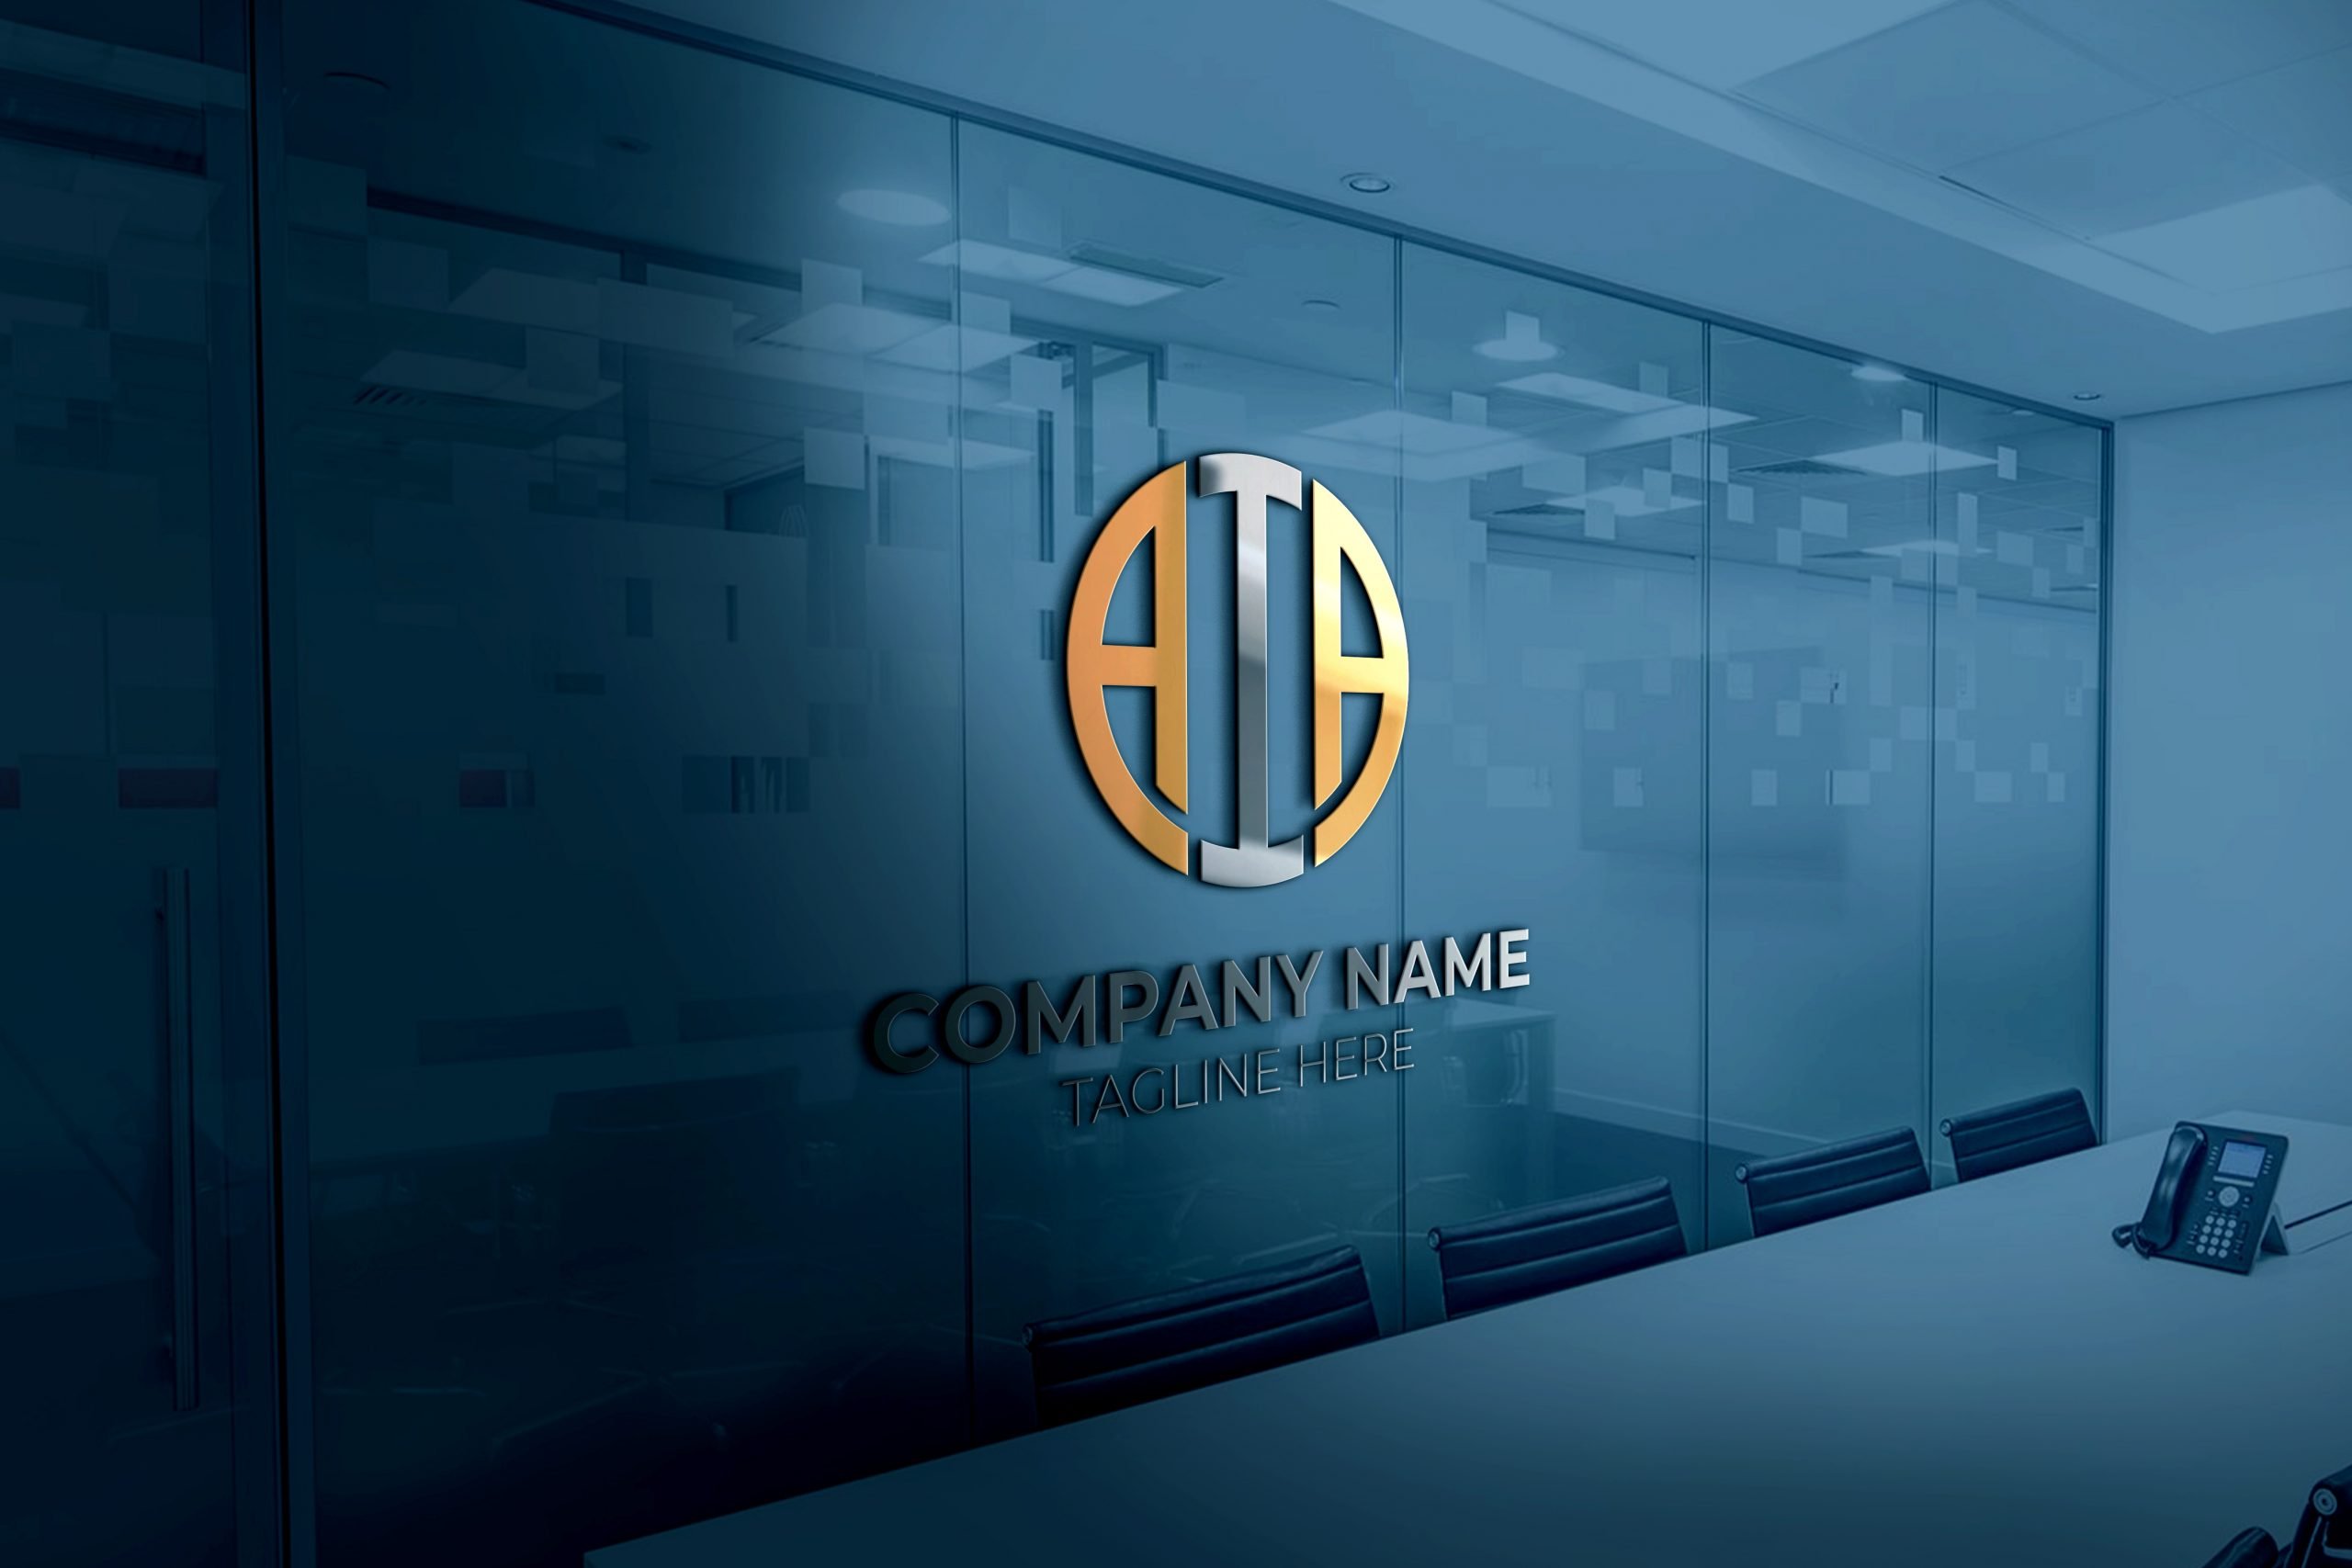 FREE 3D AIA LETTER ON OFFICE GLASS